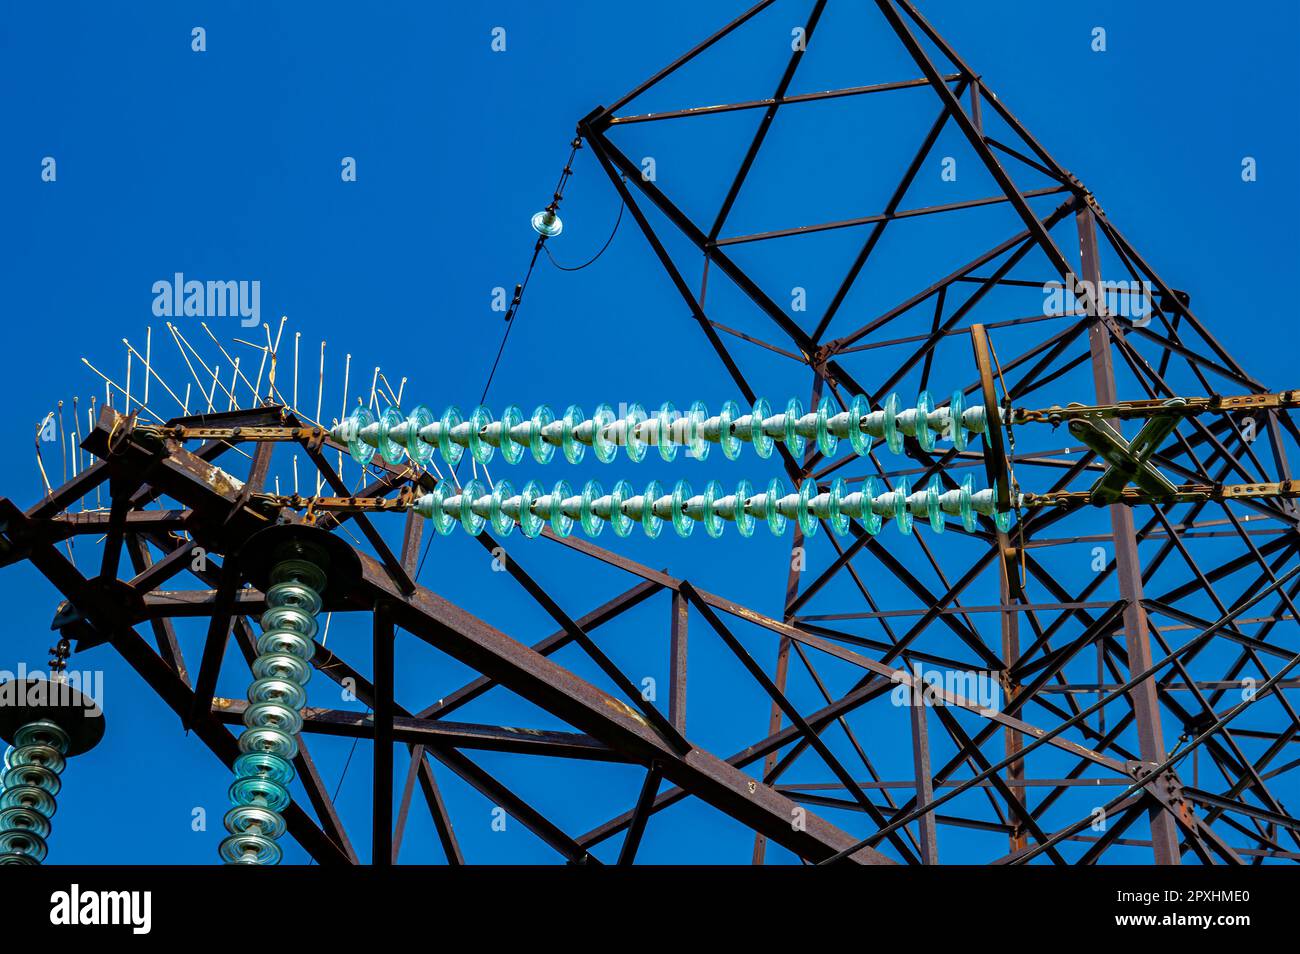 Line insulator on the electrical wires of a high-voltage tower. Electric wires. High-voltage power transmission tower. Electrical line insulators. Ene Stock Photo